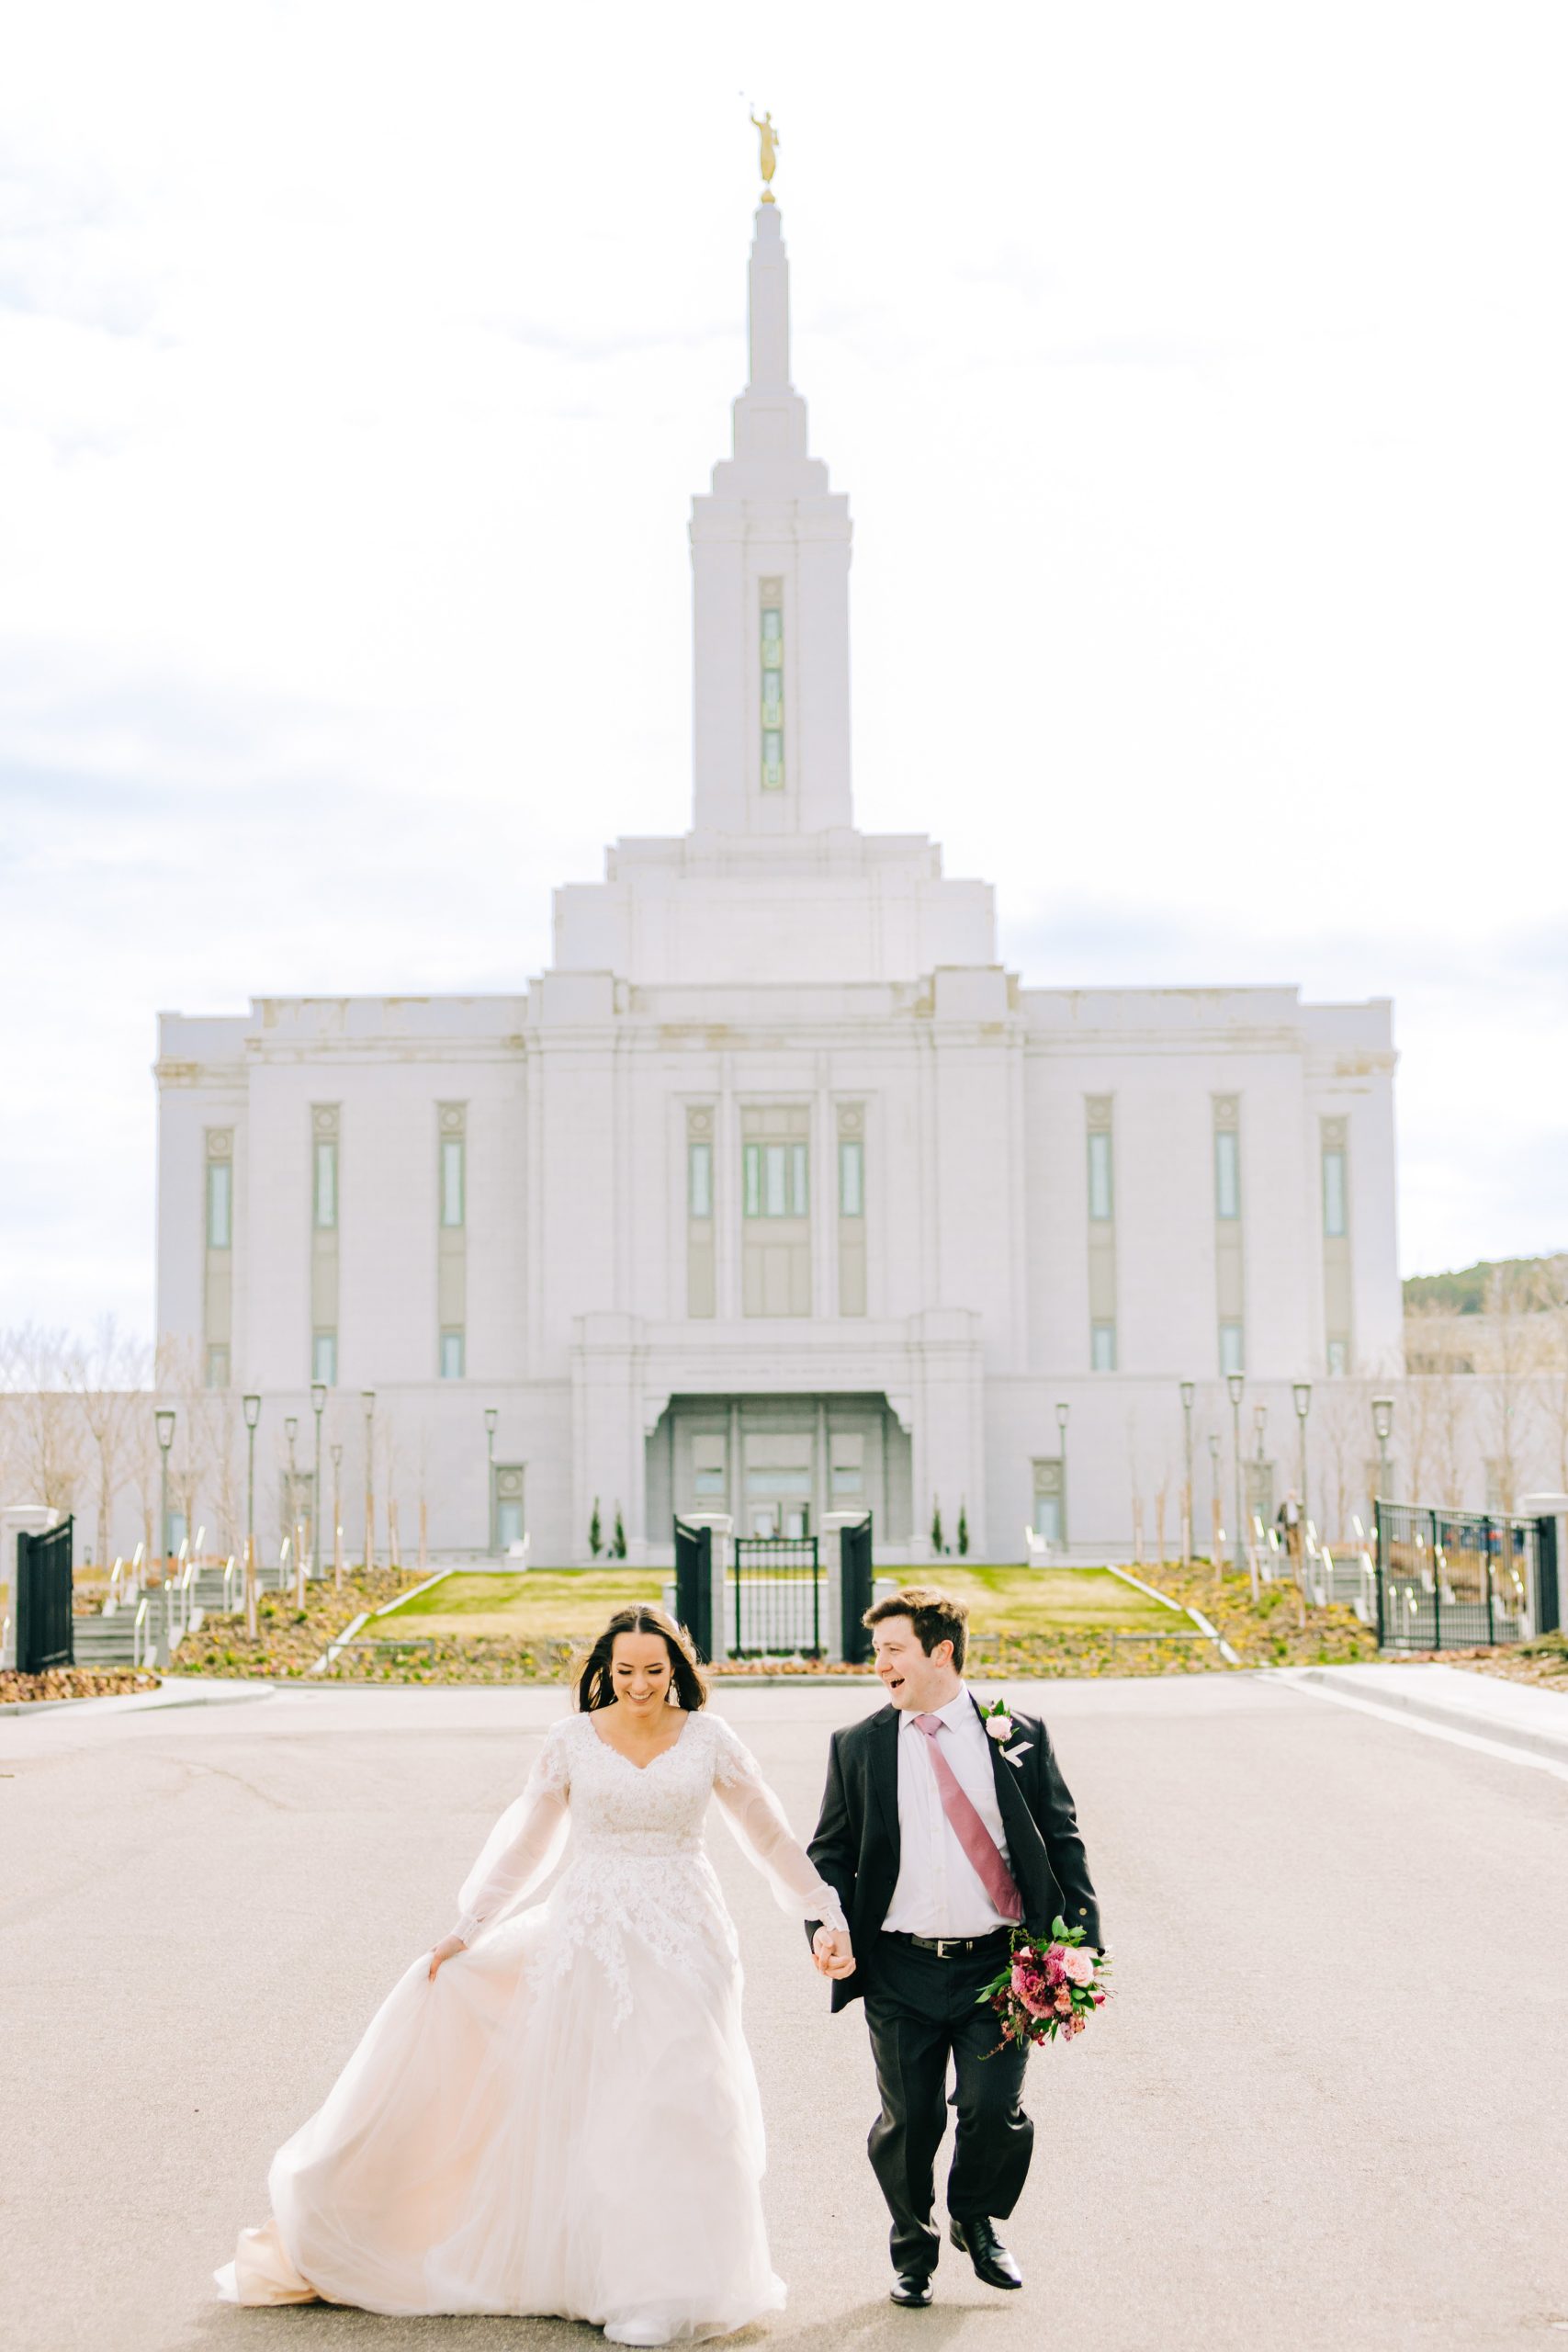 bride and groom on street with pocatello temple in view